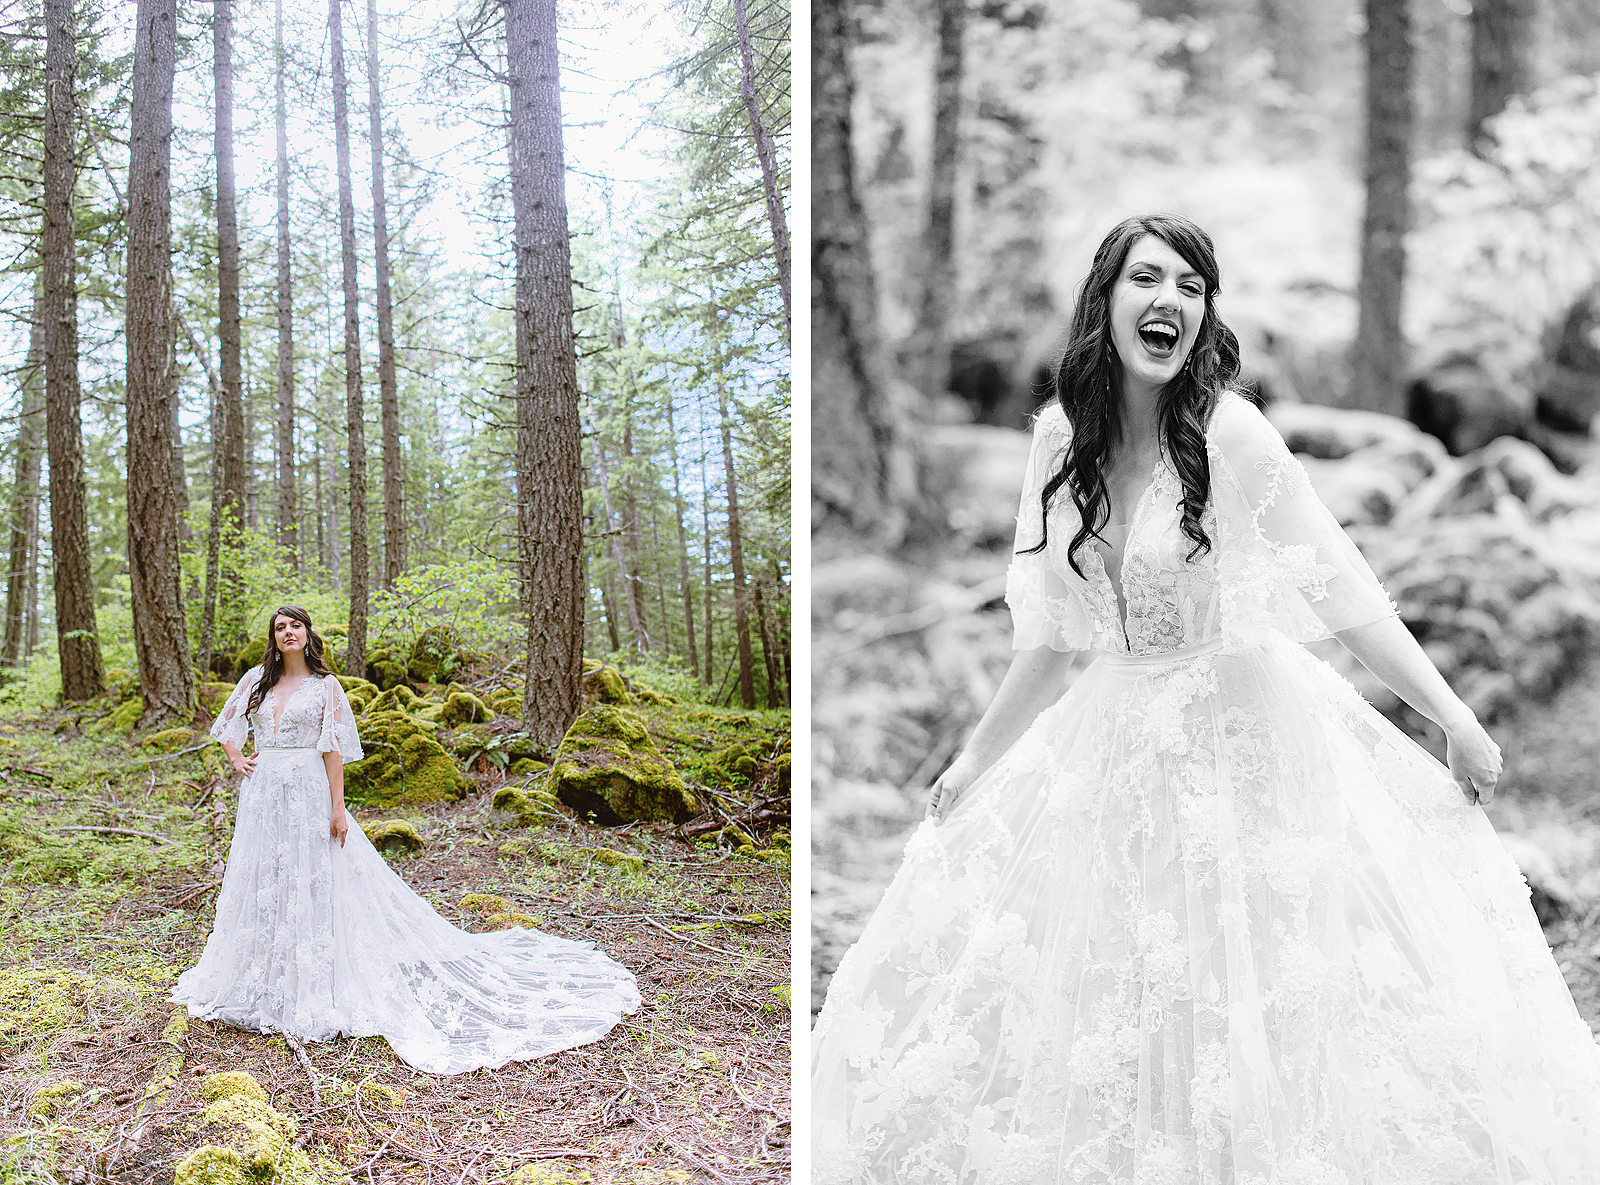 Bridal portraits in the forest - Trout Lake Wedding, WA